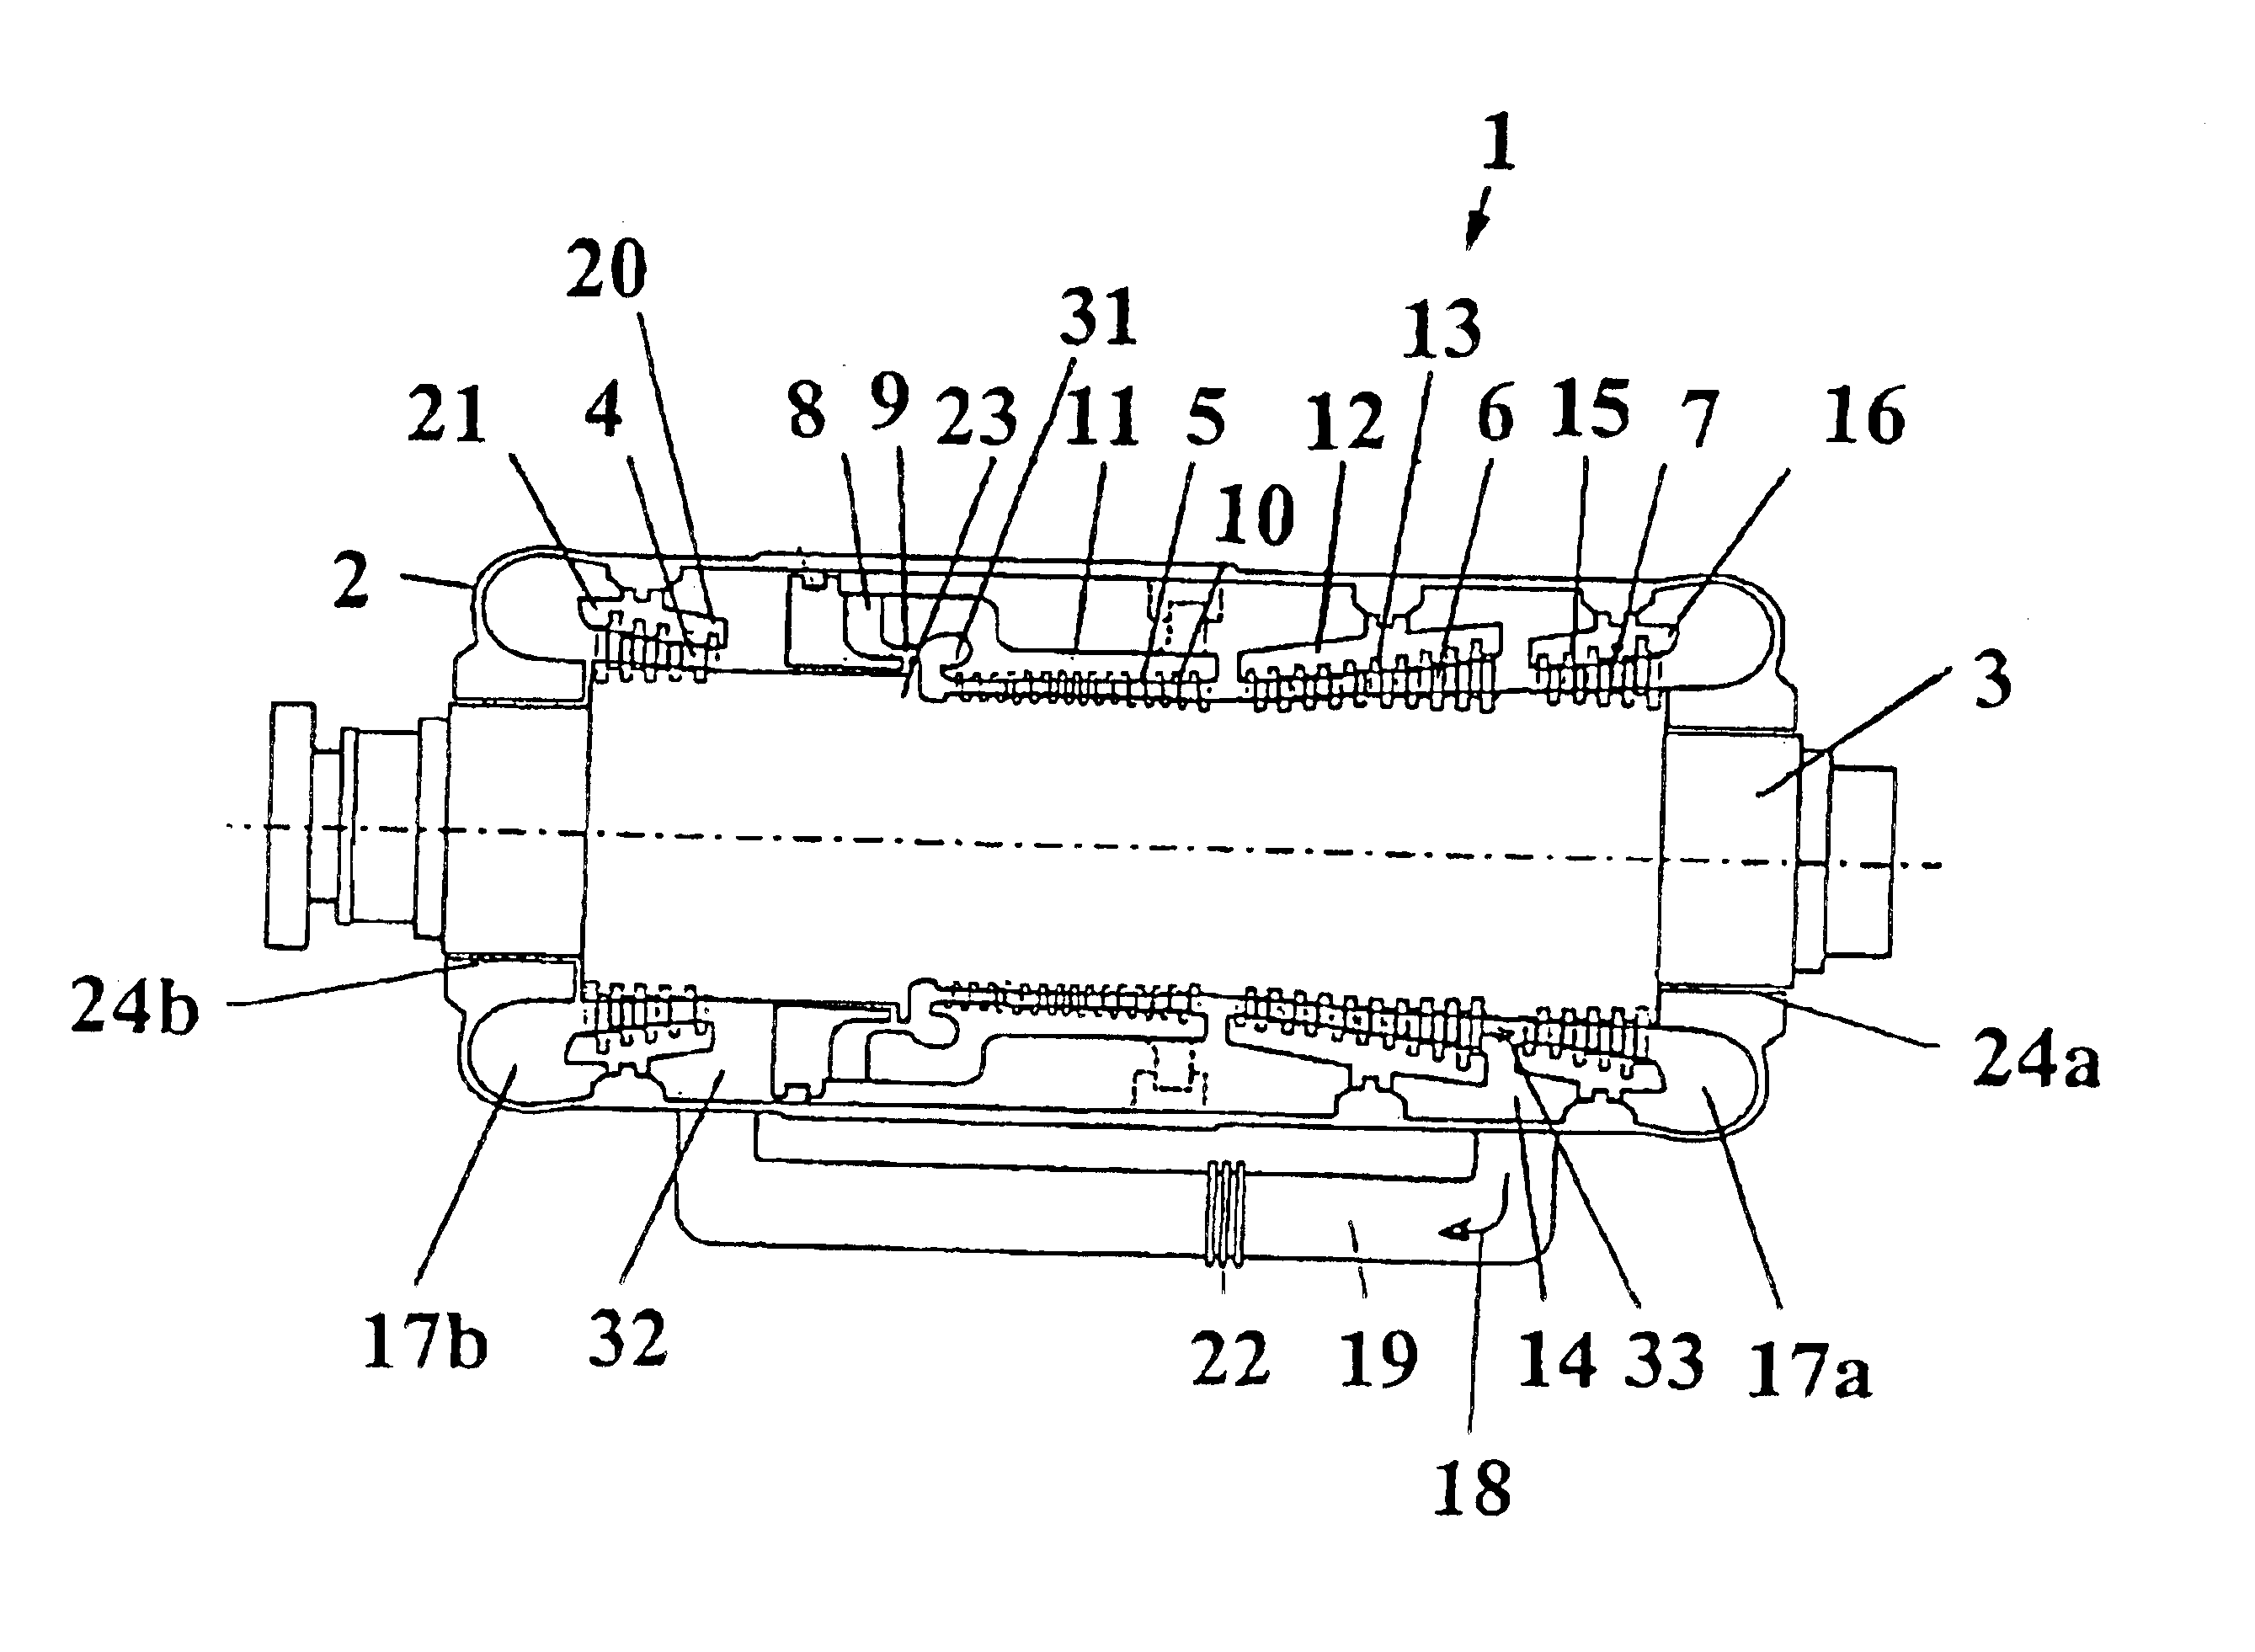 Fluid-flow machine with high-pressure and low-pressure regions